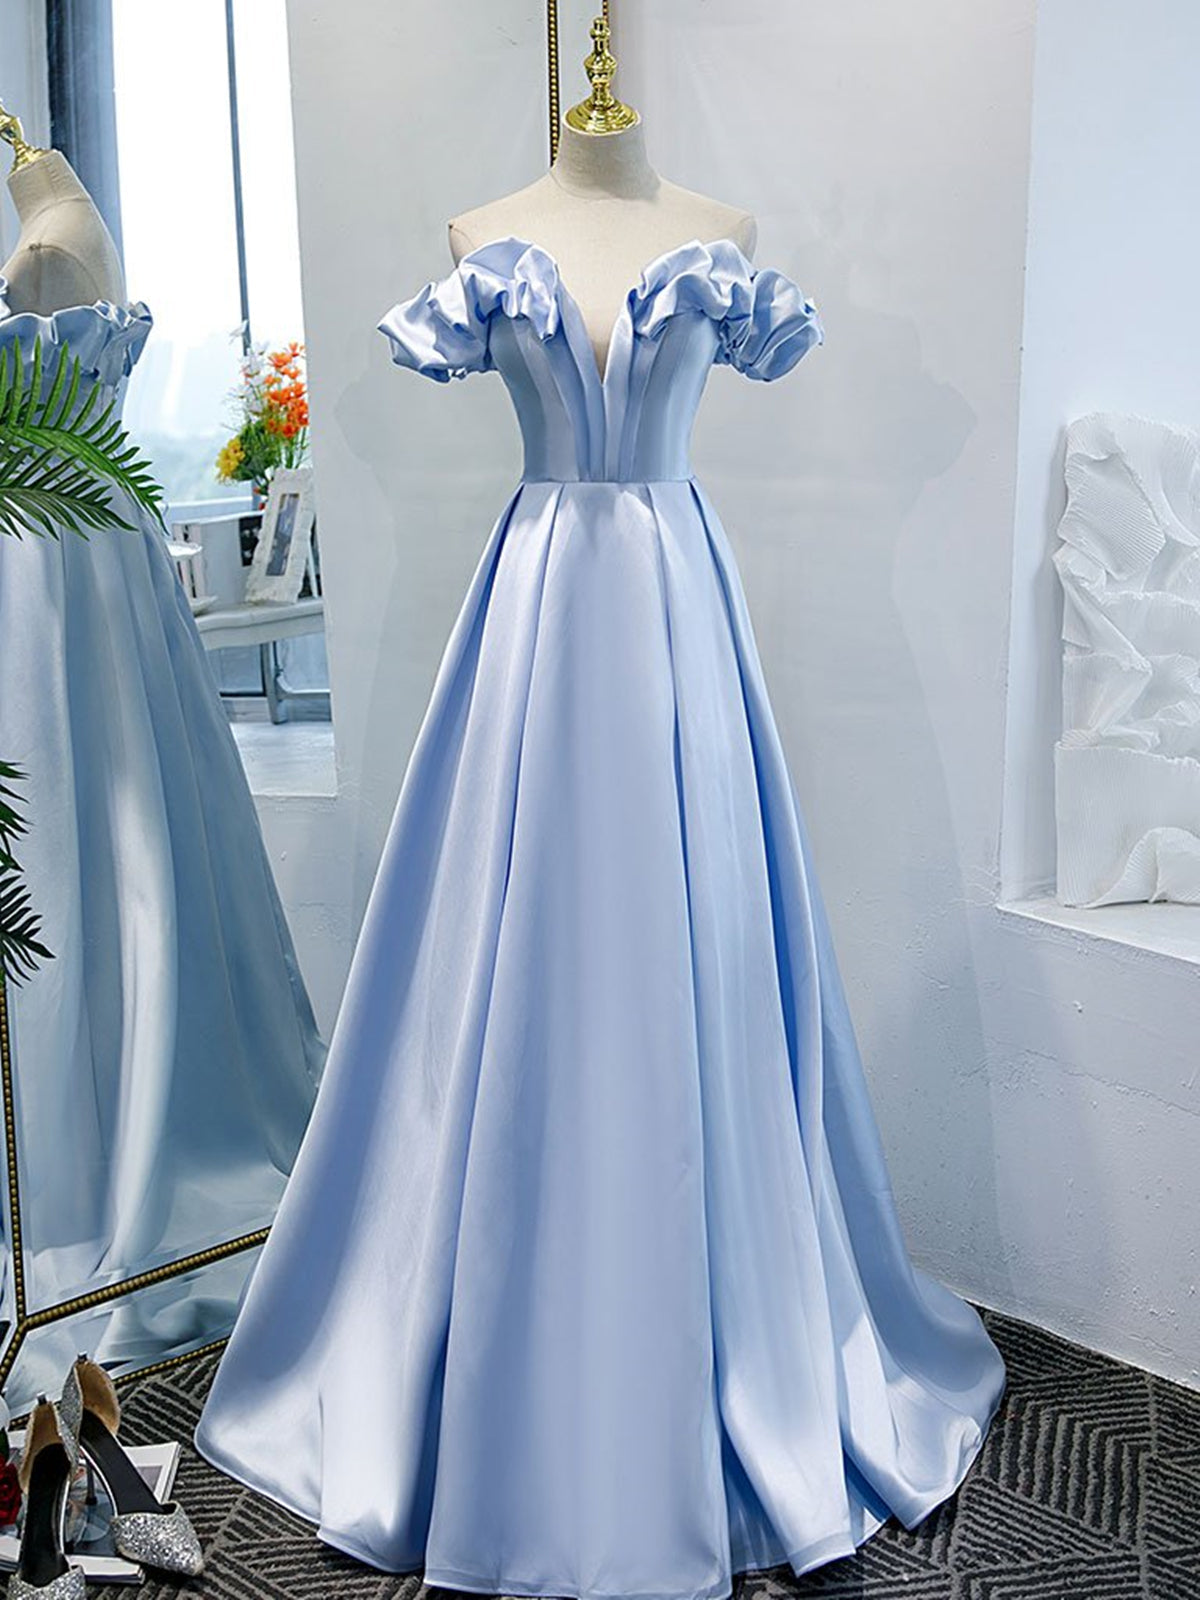 Off the Shoulder Blue Satin Corset Prom Dresses, Sky Blue Off Shoulder Satin Long Corset Formal Graduation Dresses outfit, Dress Prom